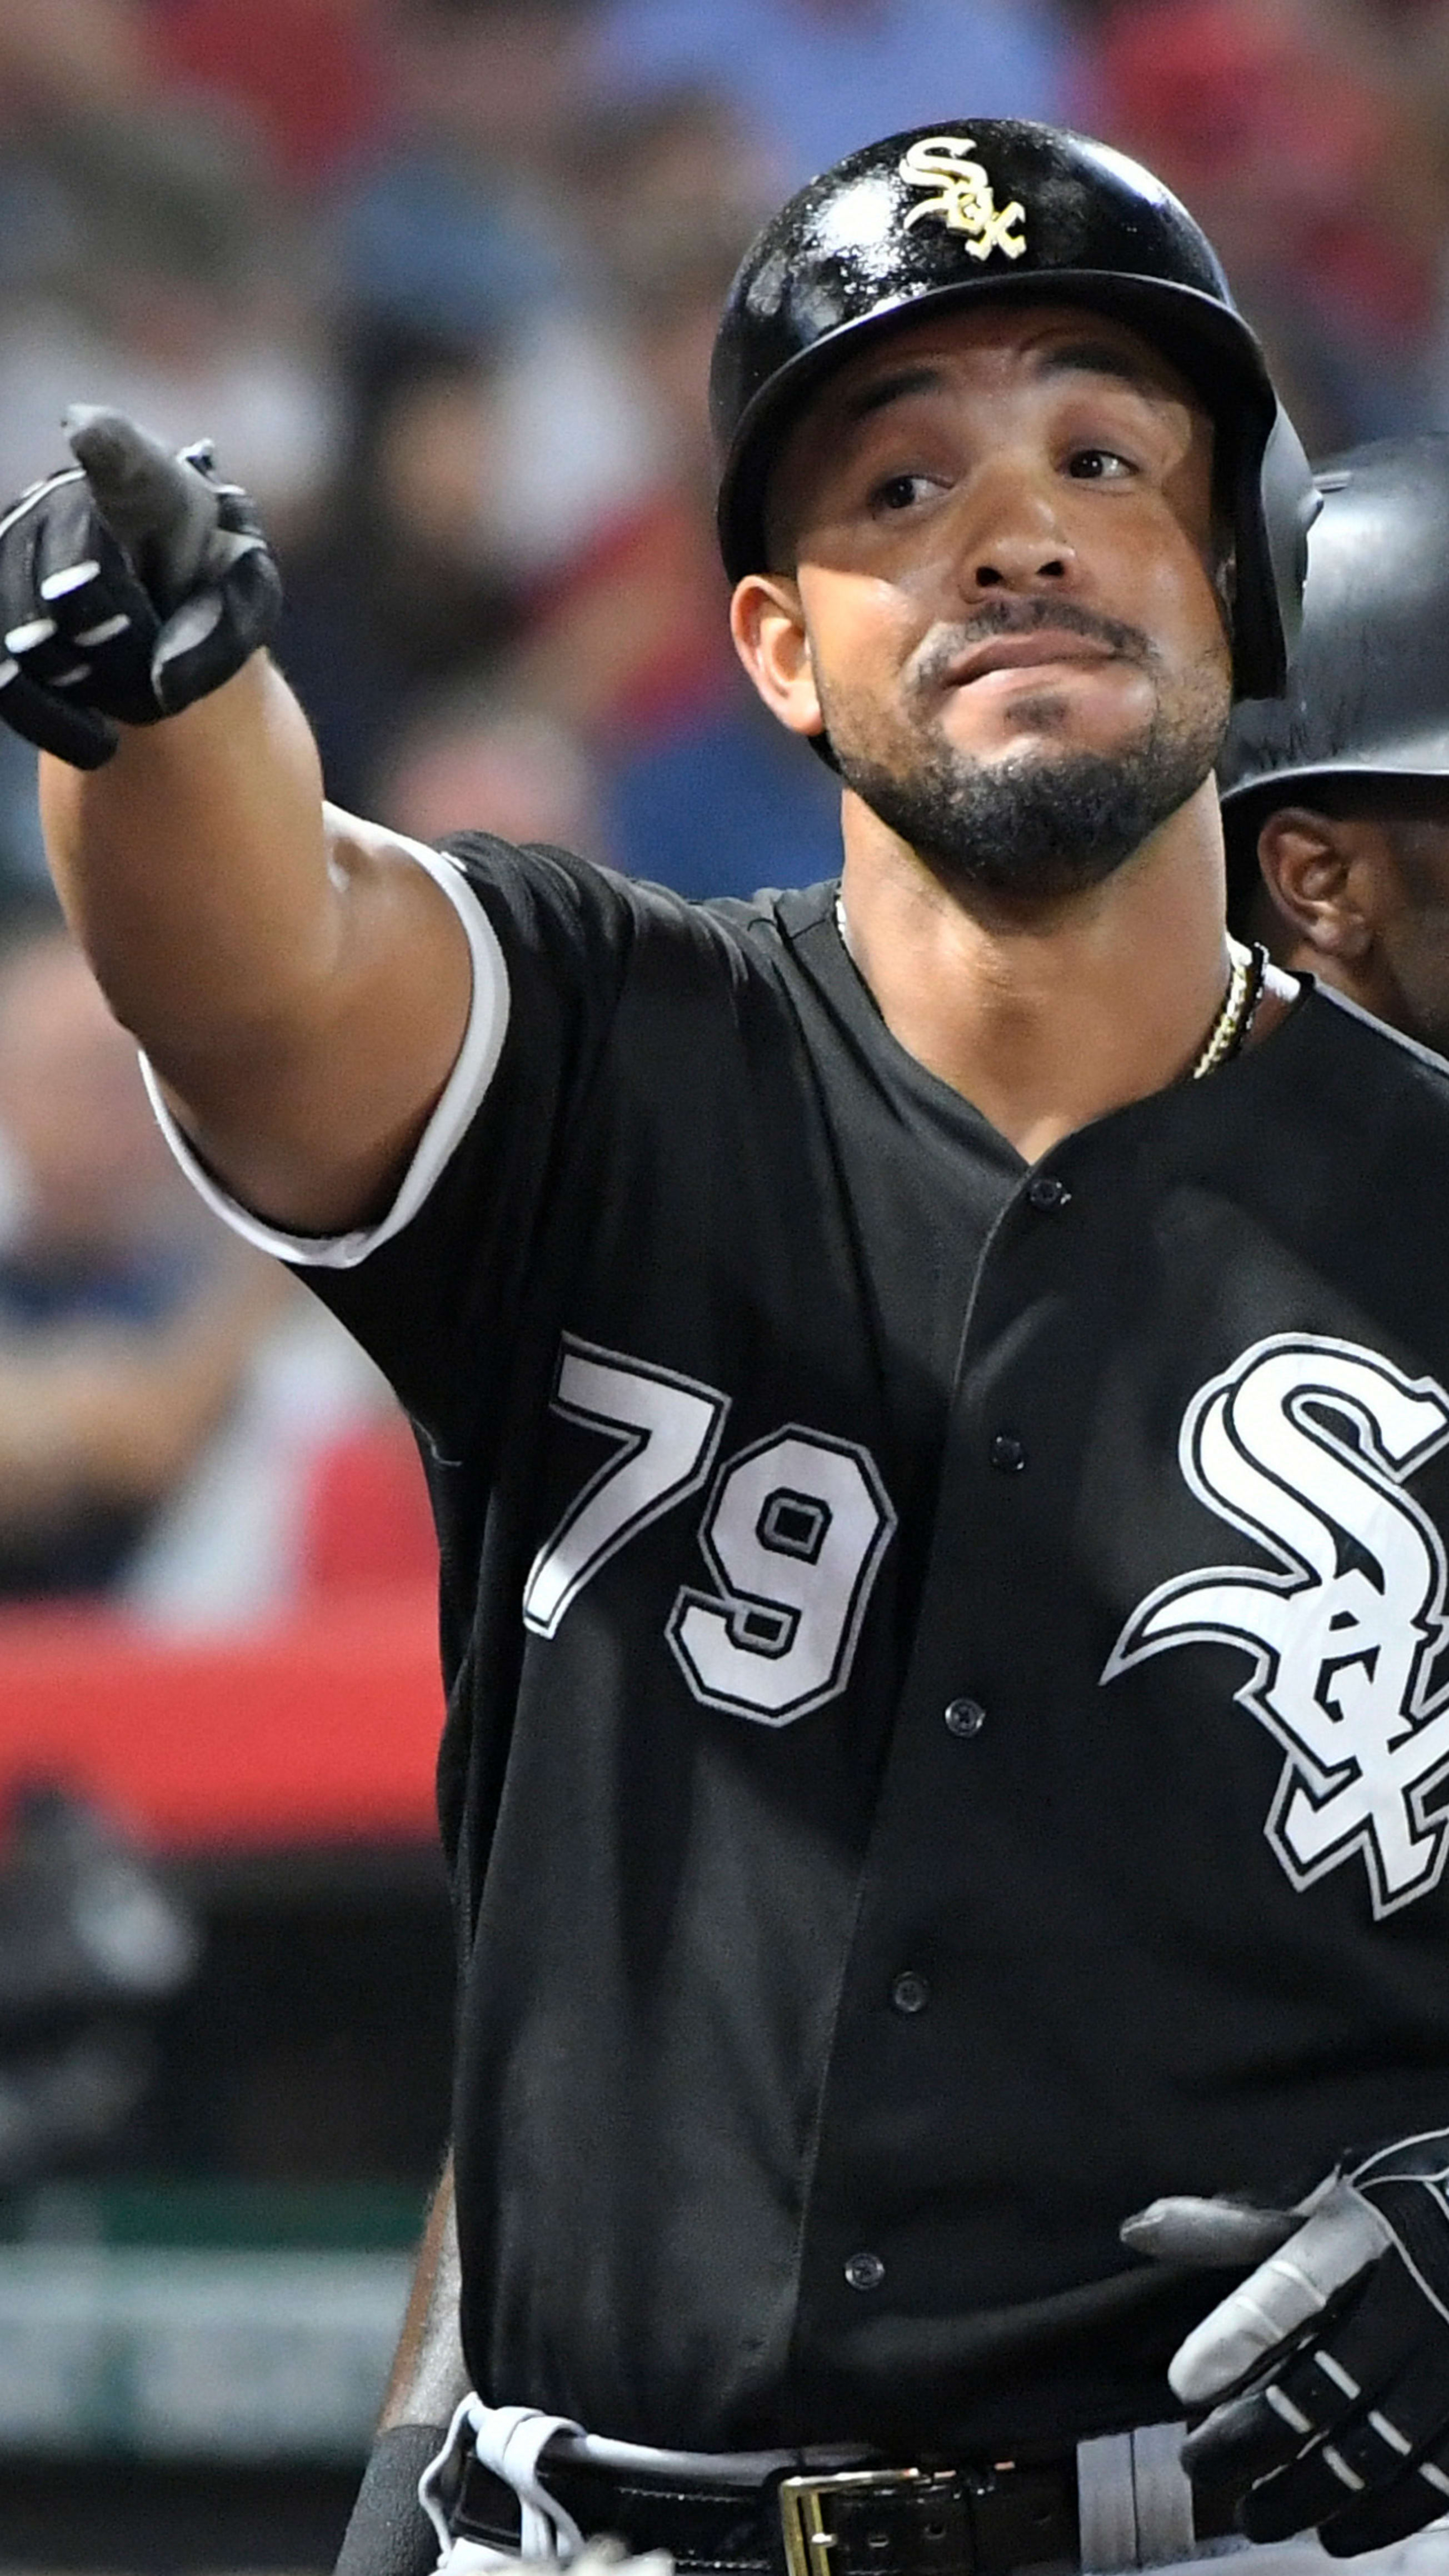 Jose Abreu's reunion with son a much-needed feel-good story for White Sox